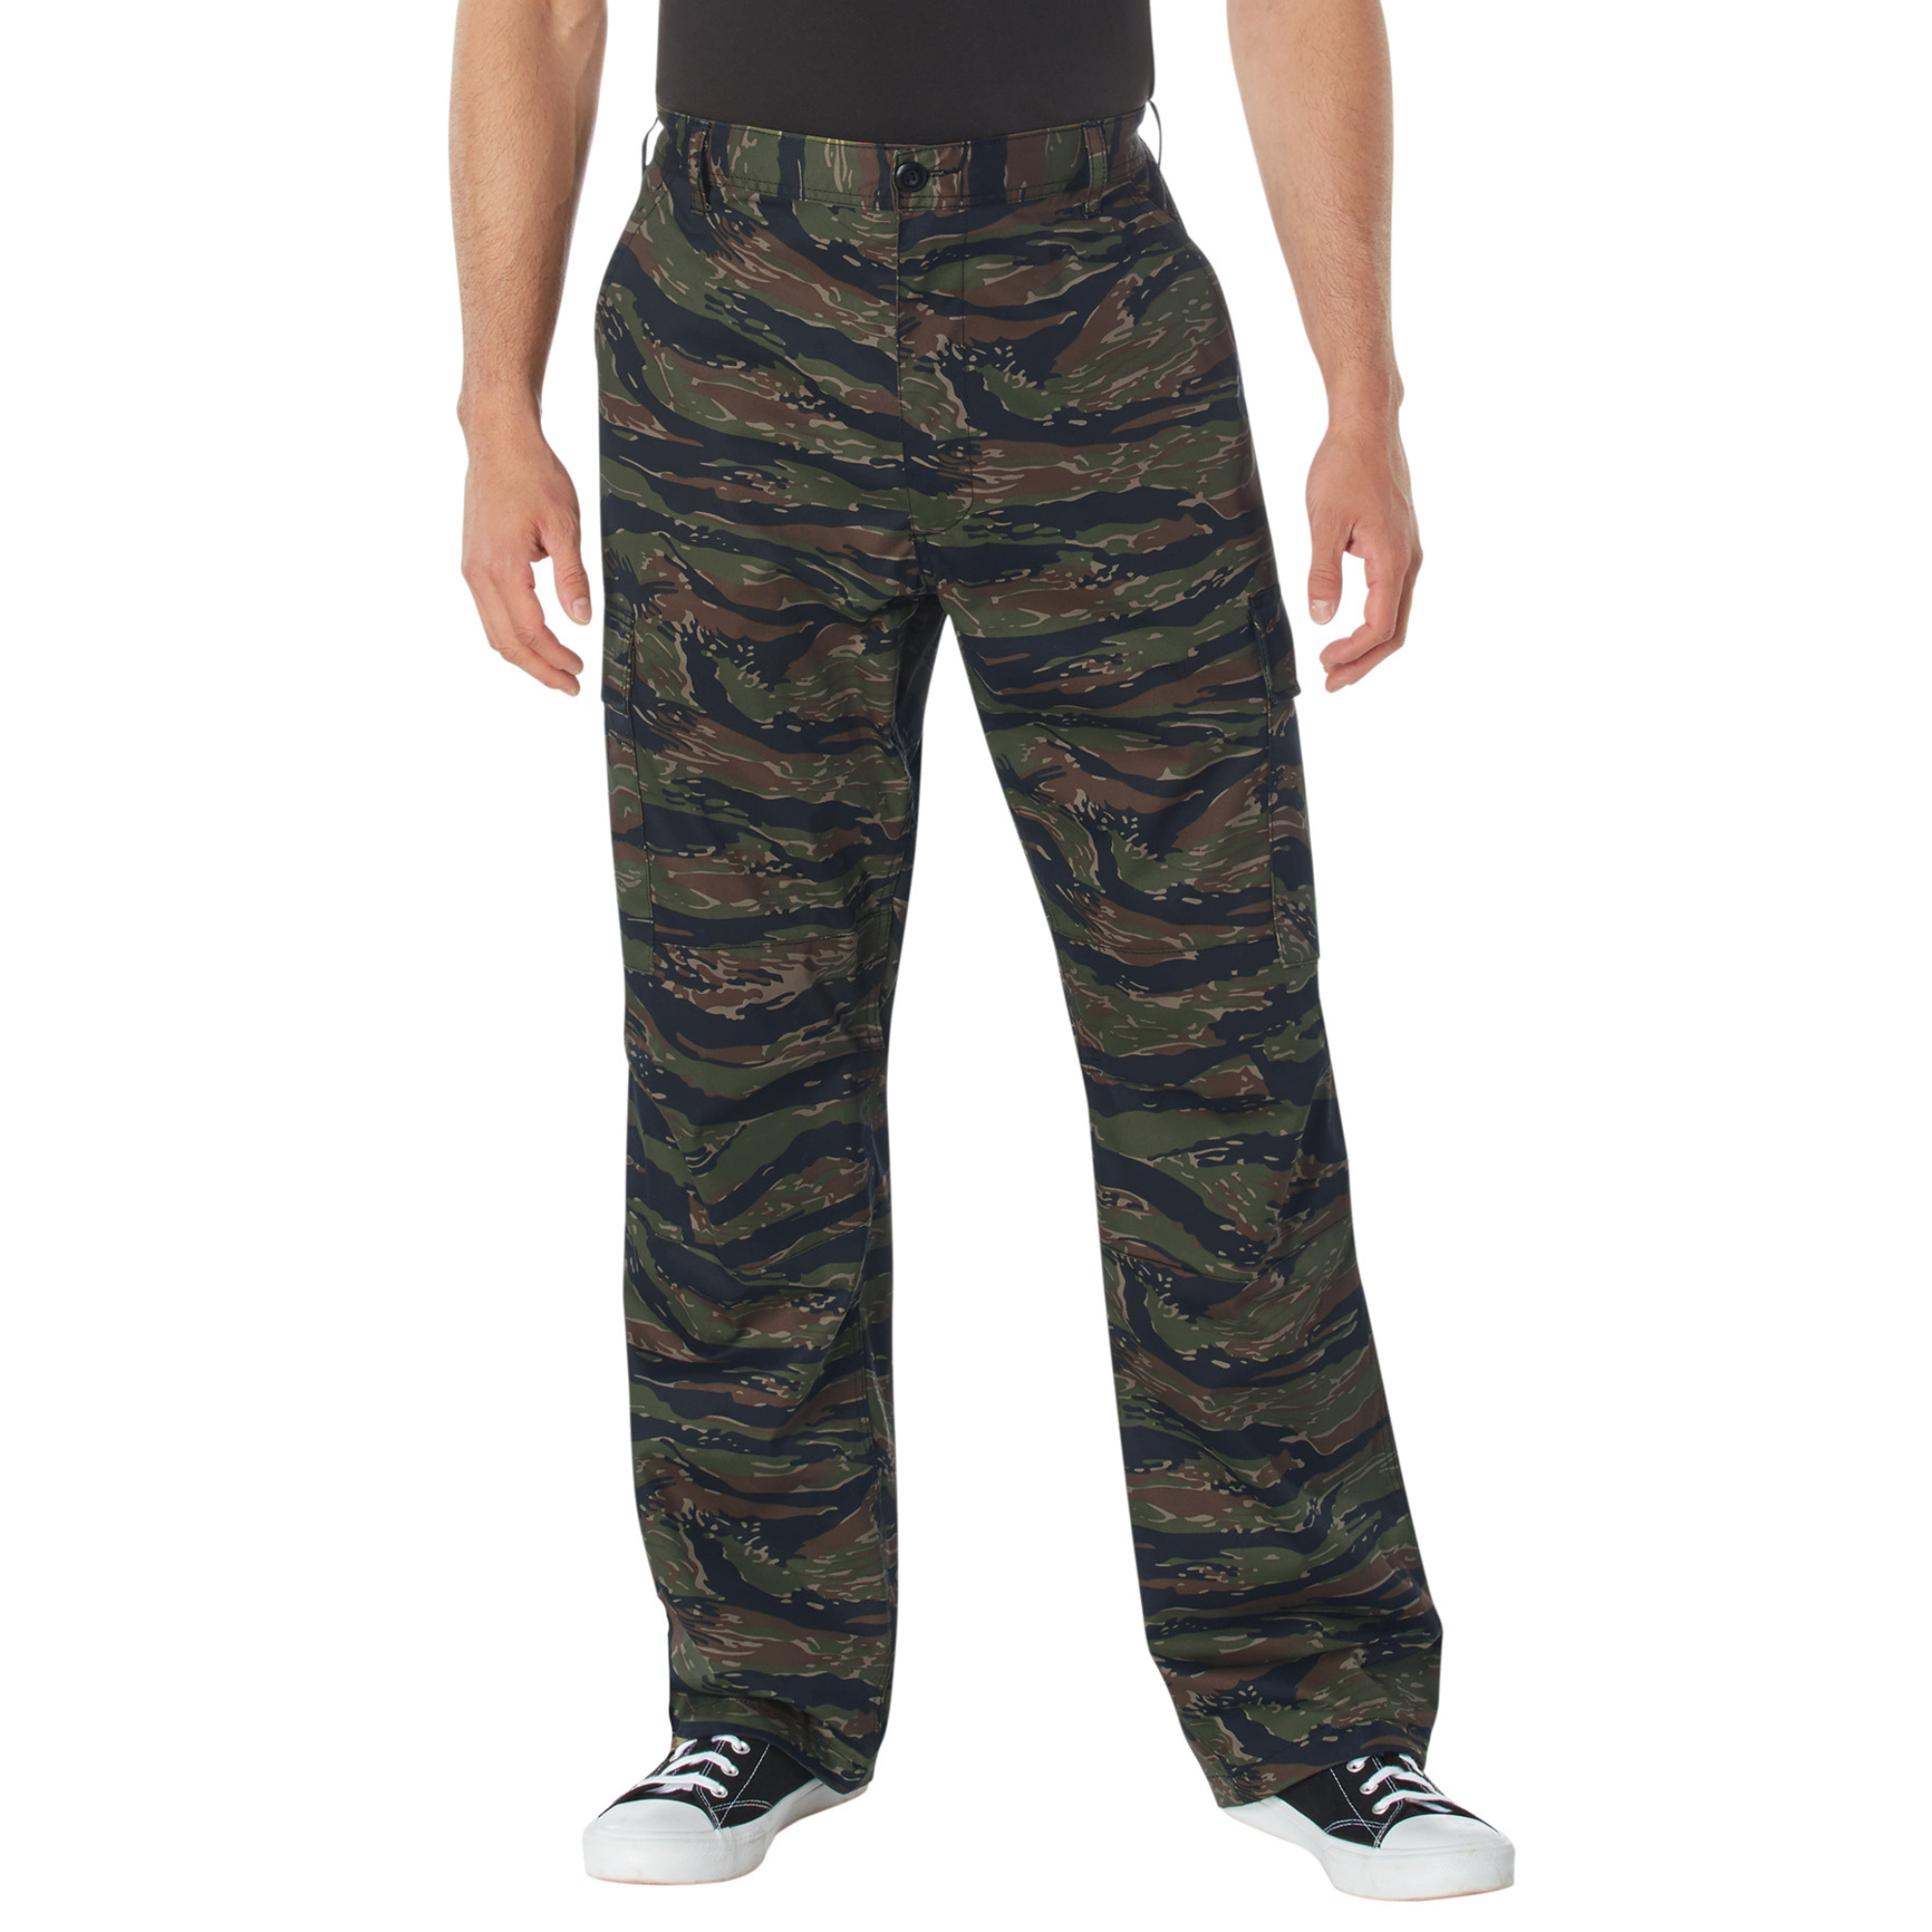 Tiger Stripe Camo - Military BDU Pants with Zipper Fly - Cotton Polyester Twill